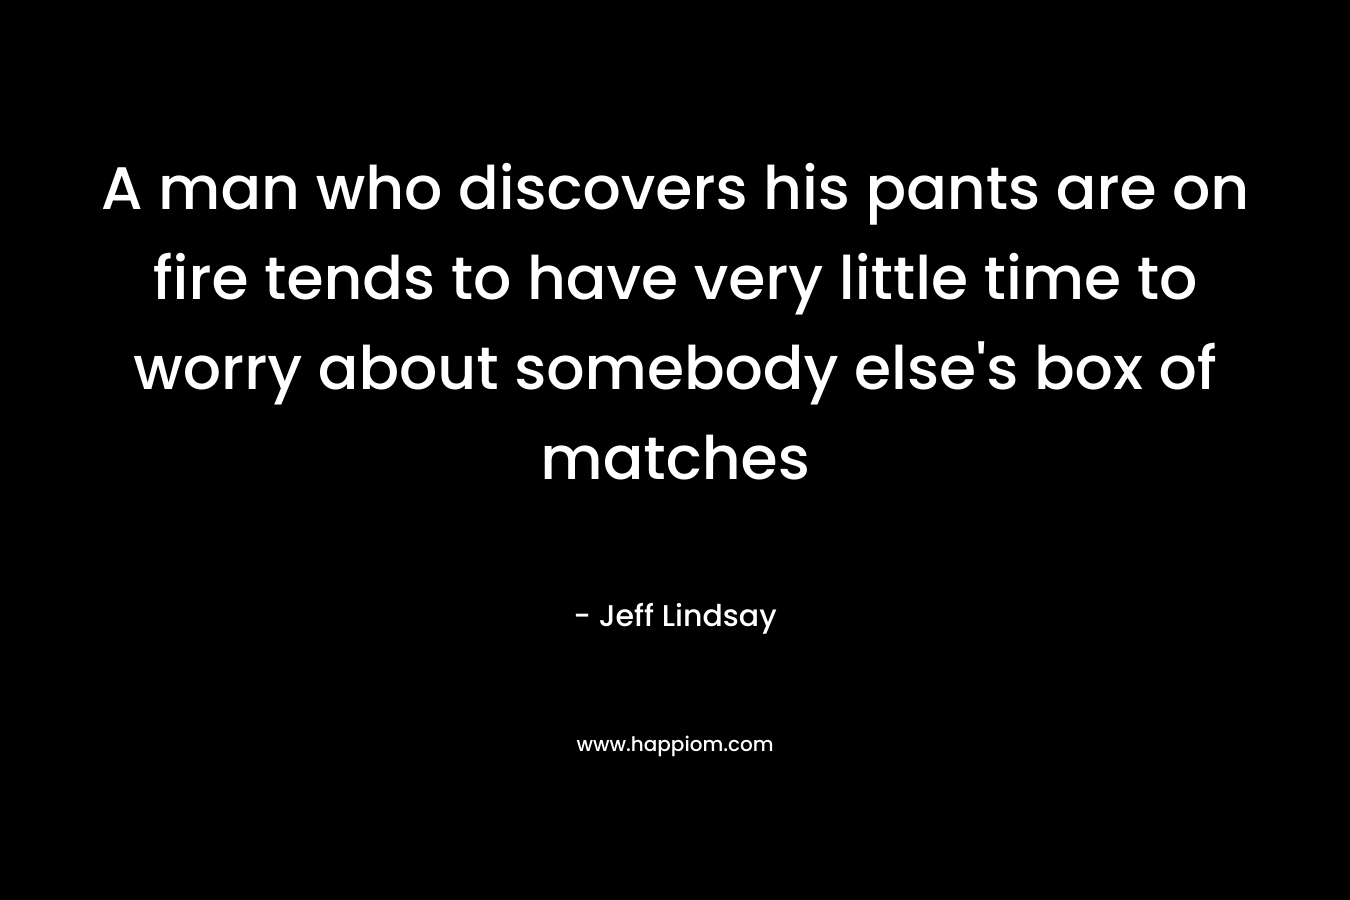 A man who discovers his pants are on fire tends to have very little time to worry about somebody else’s box of matches – Jeff Lindsay